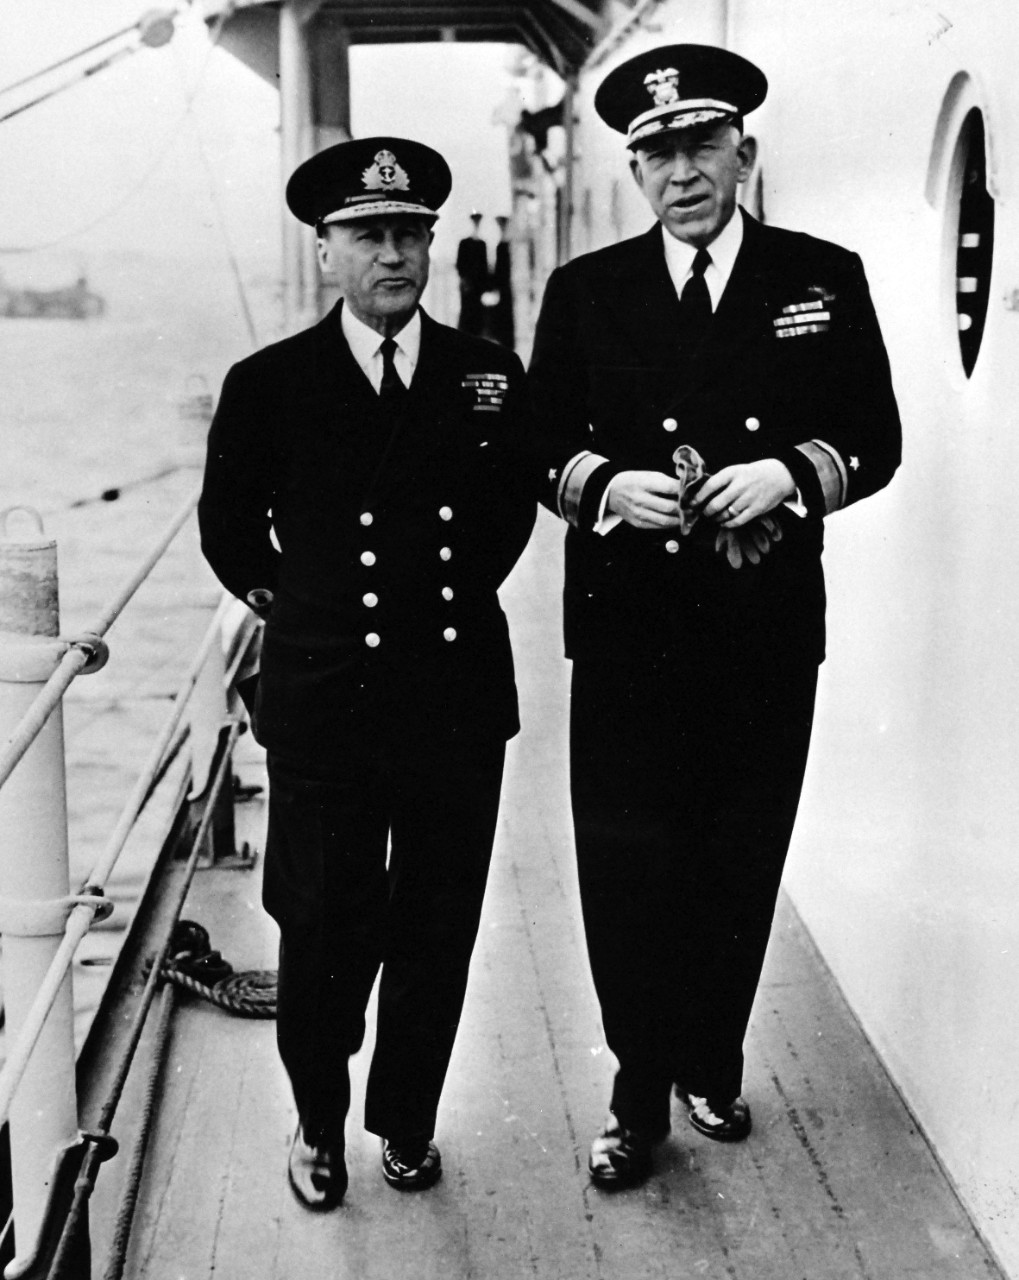 80-G-45713:   Normandy Invasion, June 1944.   Rear Admiral John L. Hall, USN, (right), and Admiral Sir Bertram Ramsay, Commander-in-Chief of Allied Naval Forces, stroll about a U.S. warship shortly before the vessel went into action against Nazi shore batteries on D-Day.   Photographed on 10 June 1944.  Official U.S. Navy Photograph, now in the collections of the National Archives.  (2014/9/9).  